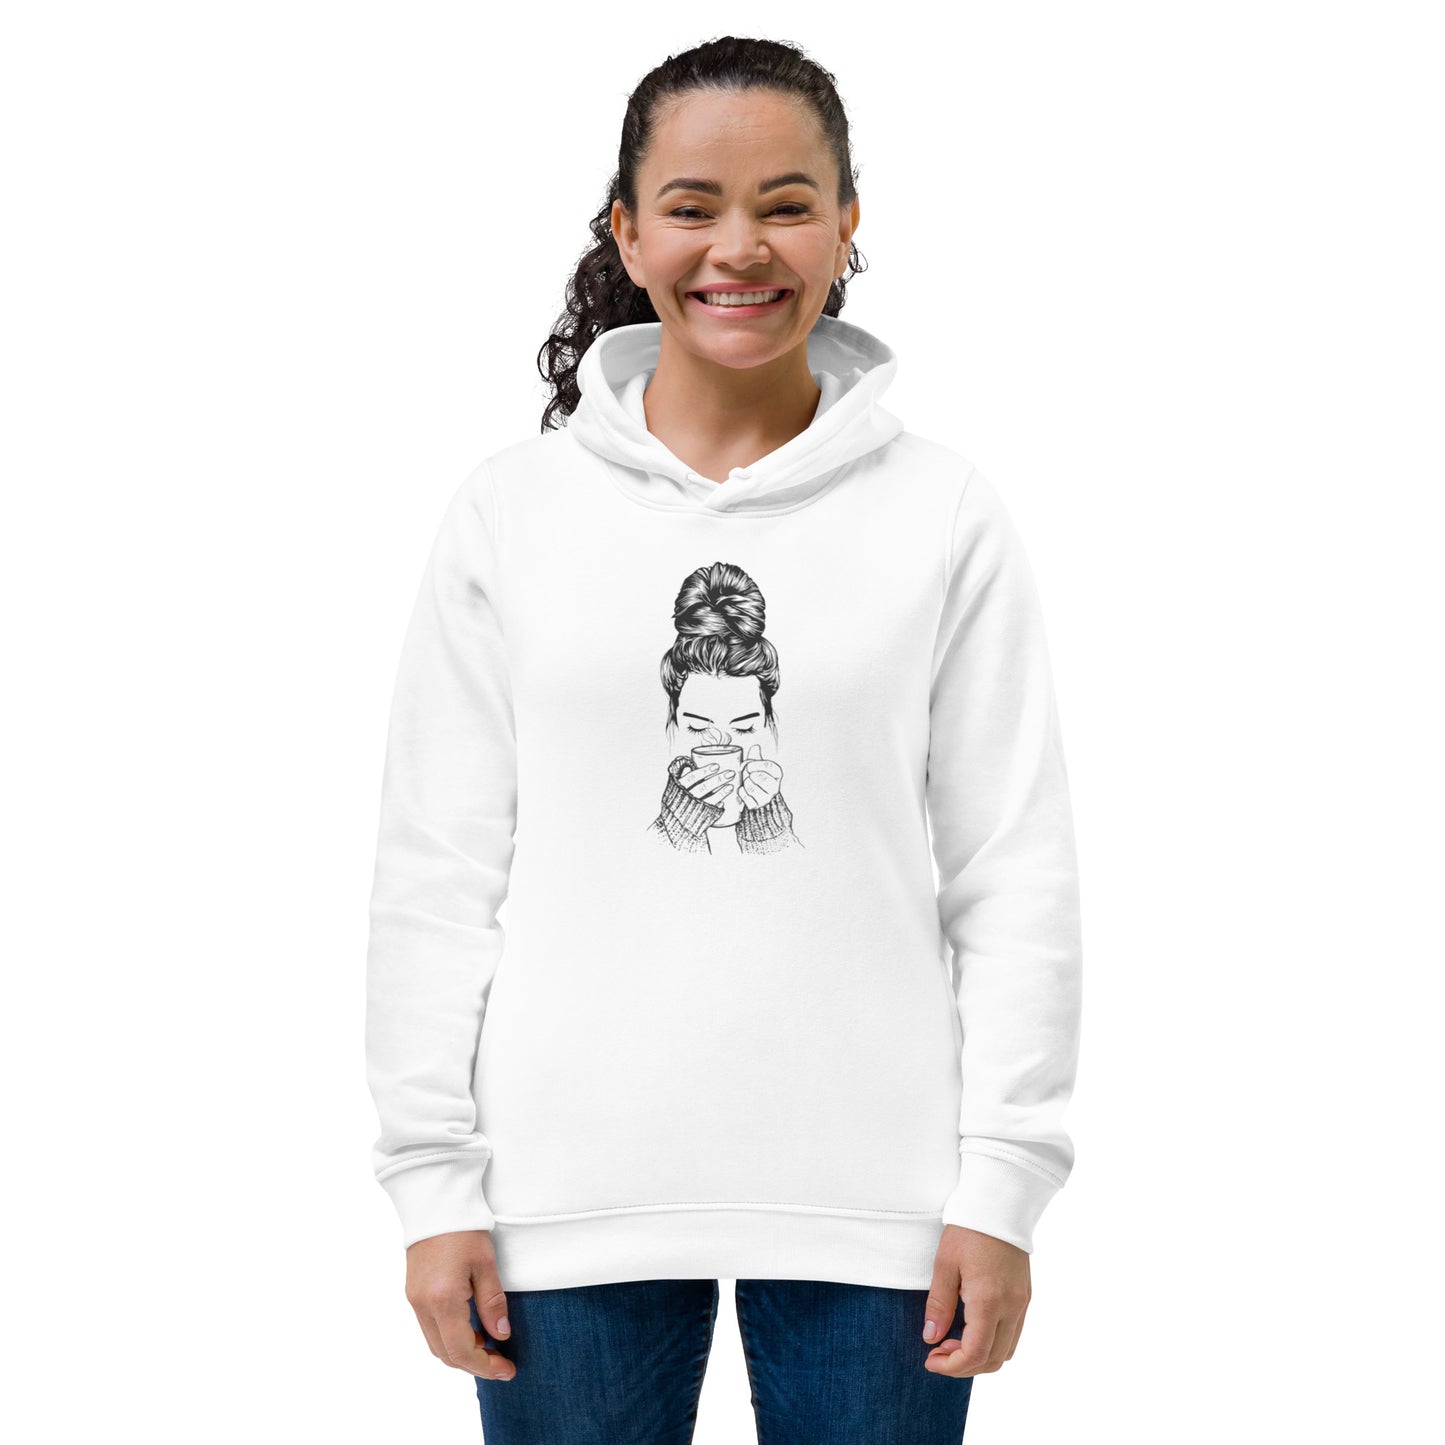 Coffee Lover Women's eco fitted hoodie